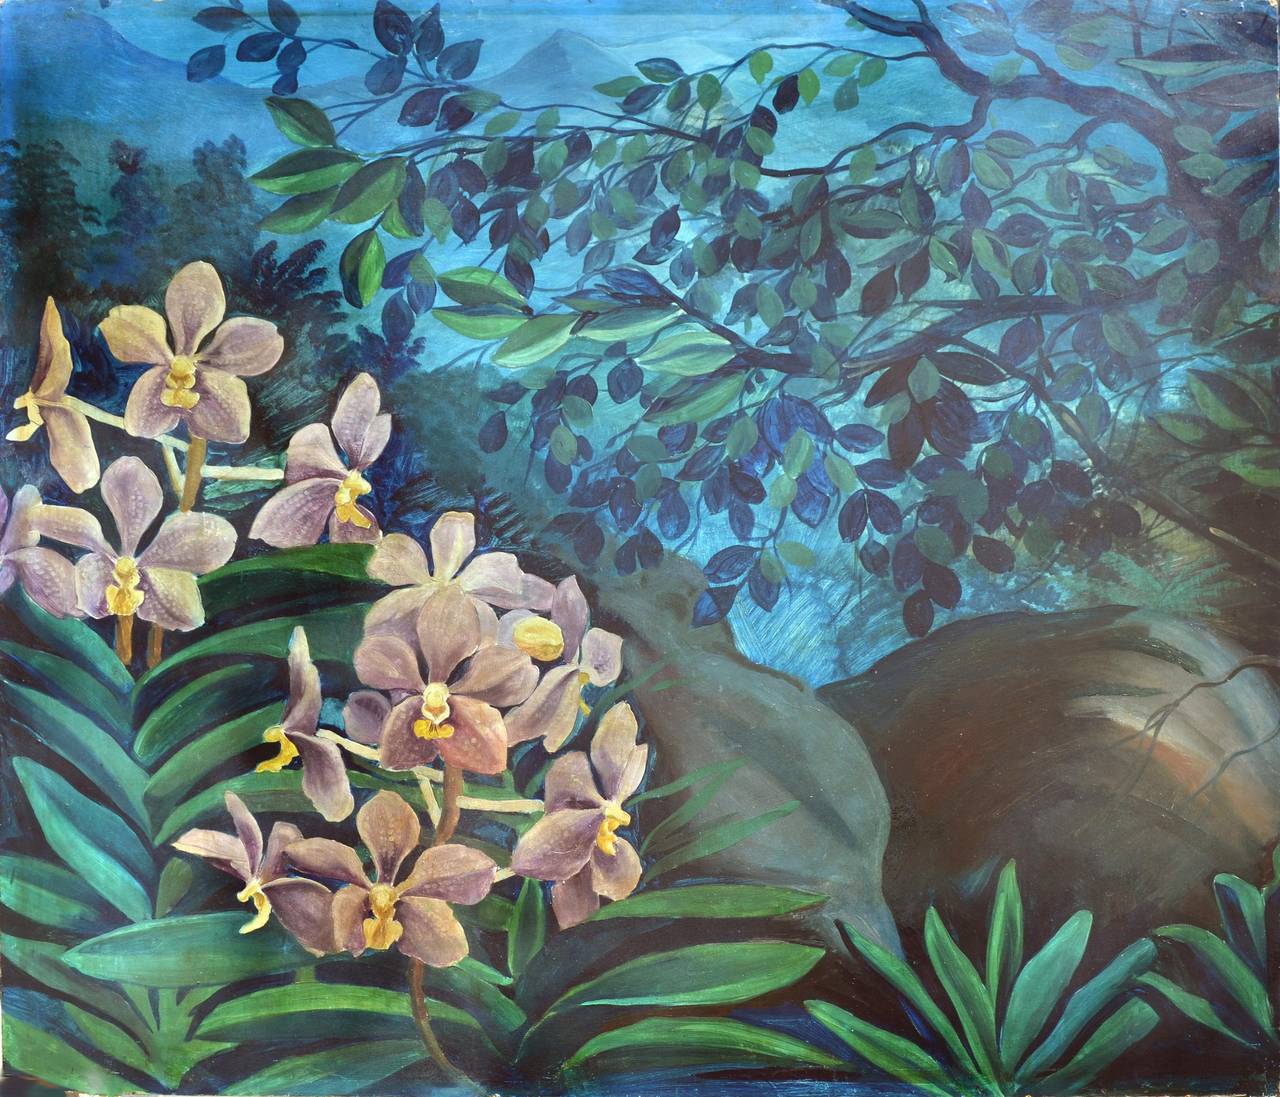 Large-Scale Tropical Secret Garden, Mid-Century Botanical Diptych with Waterfall - Painting by Unknown